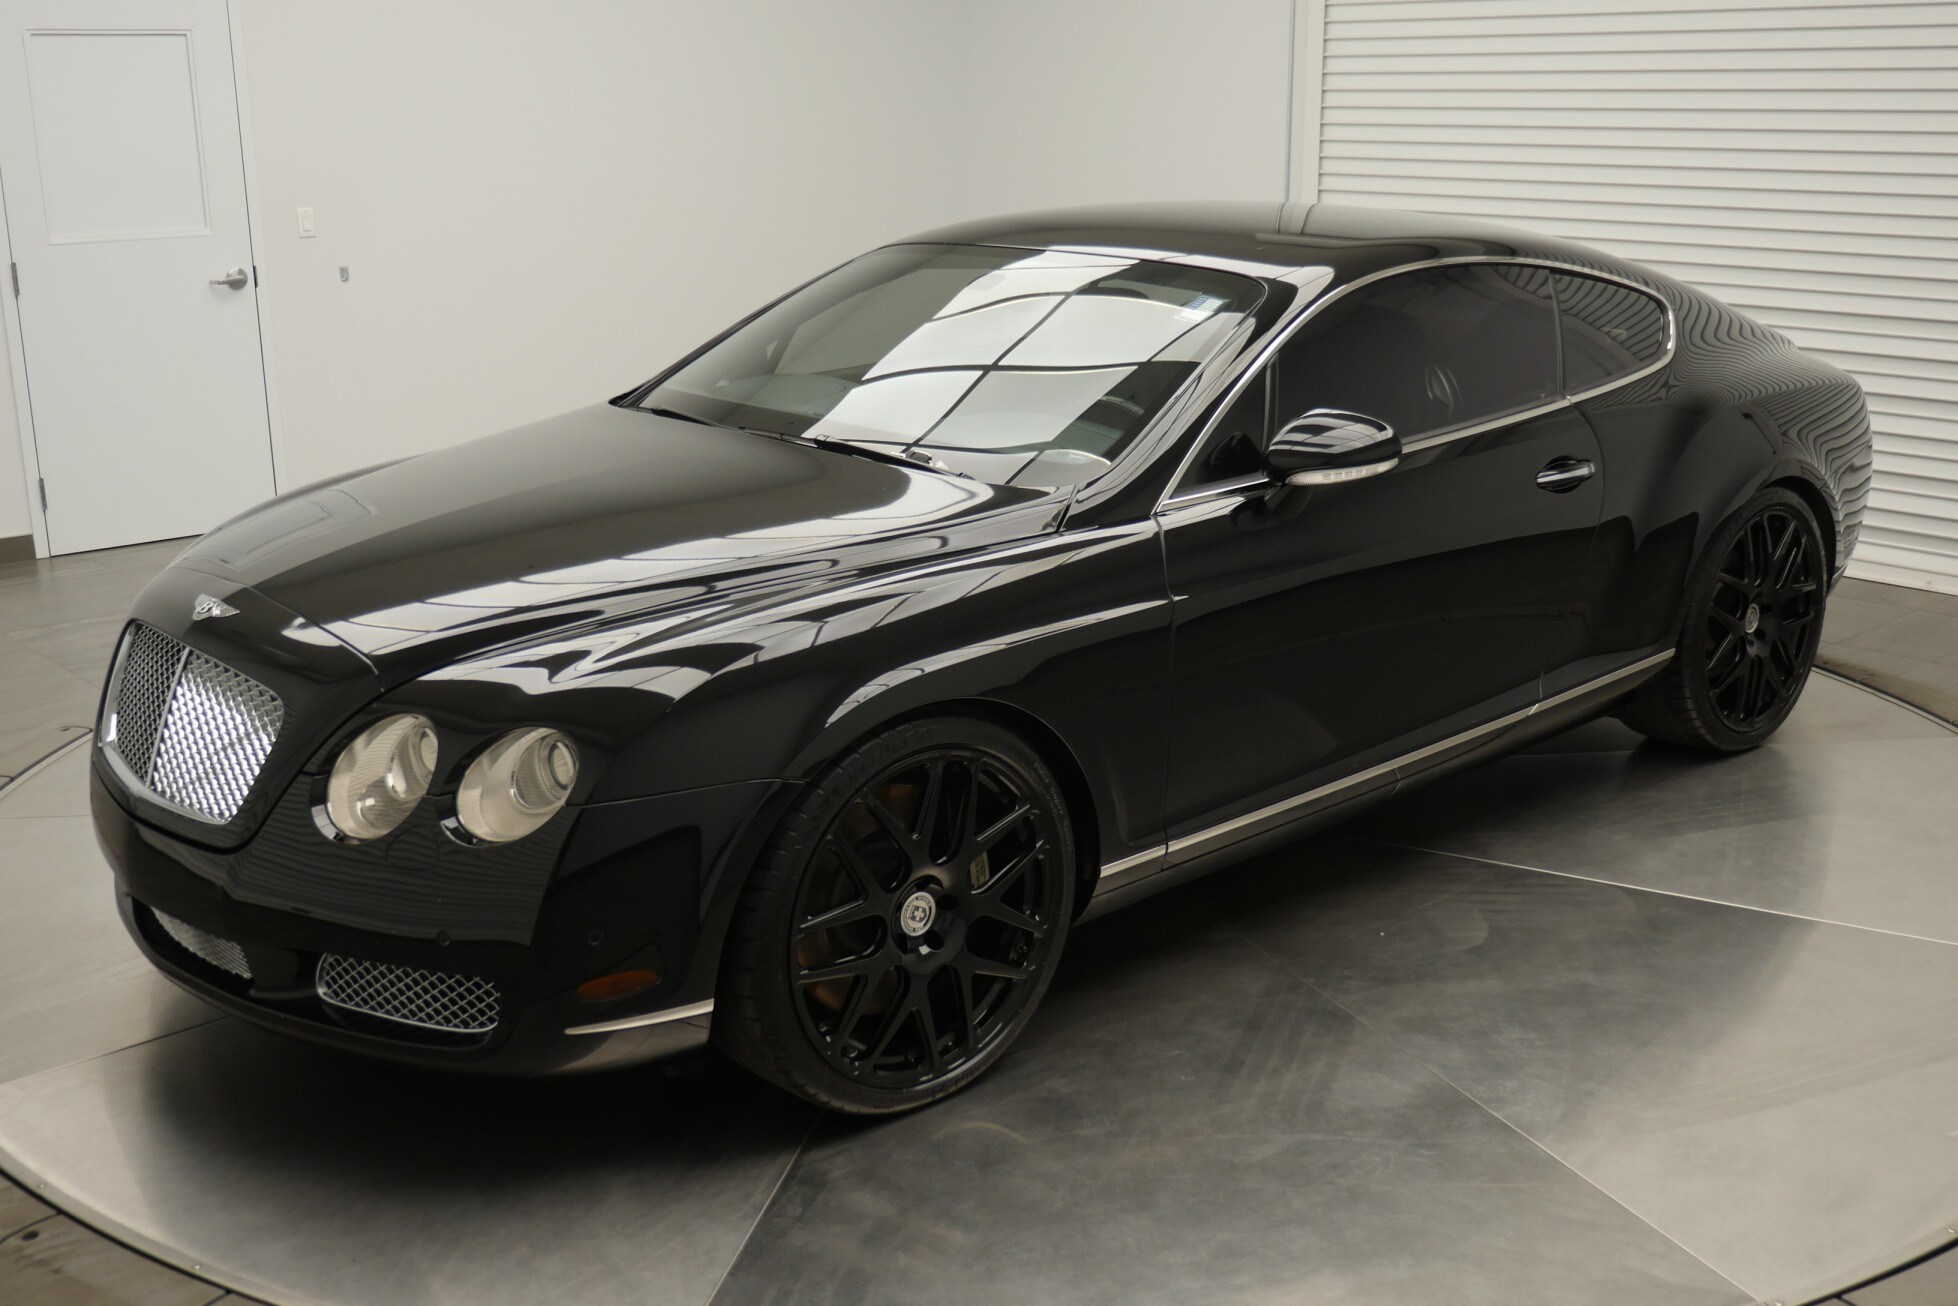 previously sold used car Bentley Continental Mulliner 2007